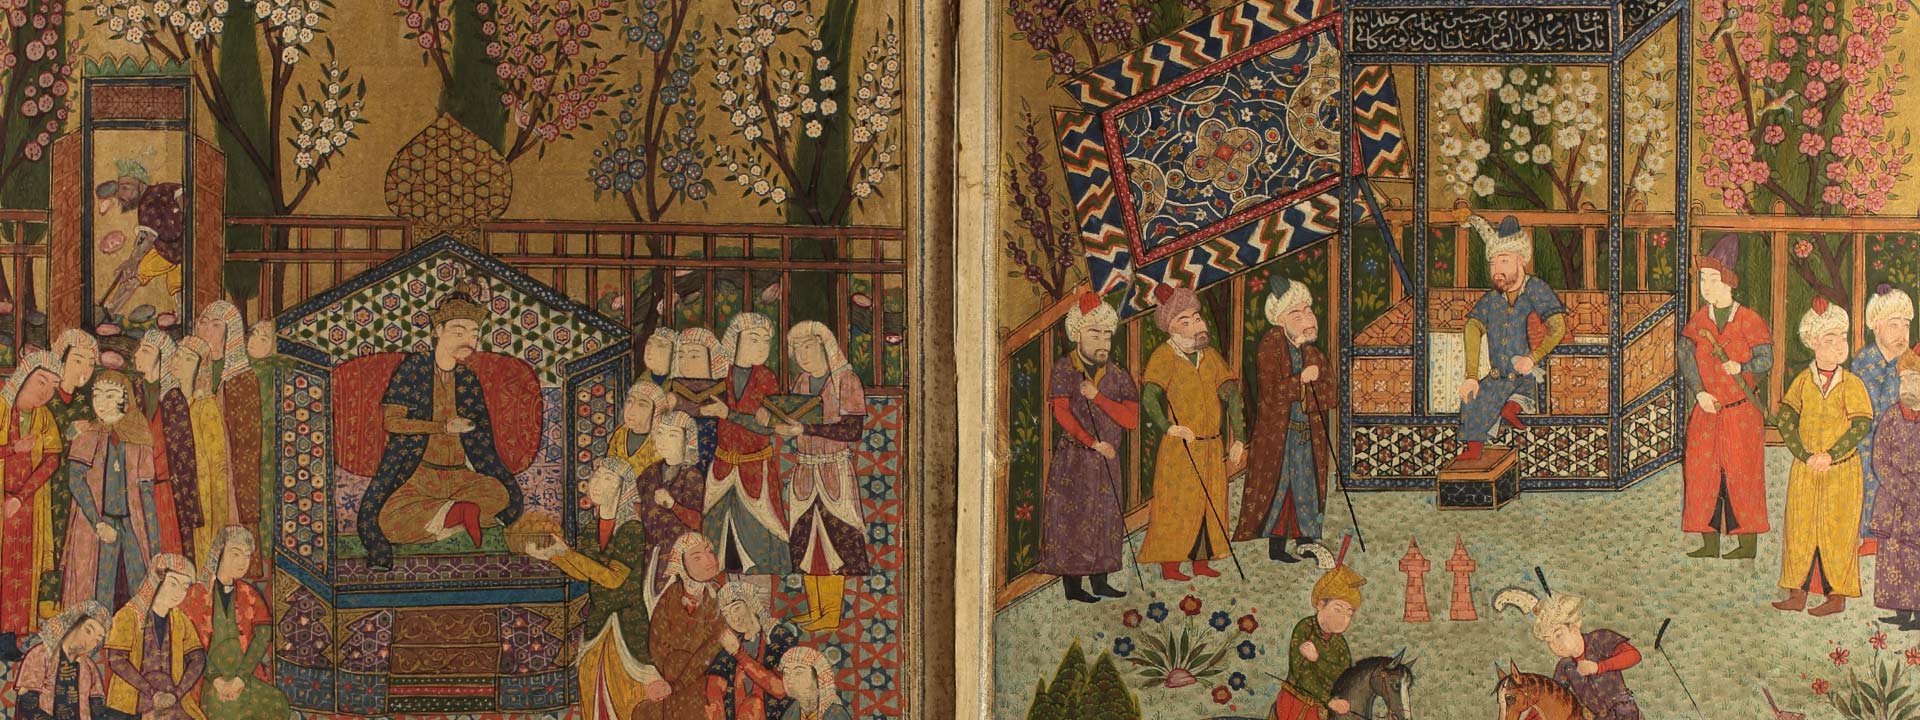 Announcing a Major Initiative to Open Digital Access to Over 2,500 Rare Islamic Texts